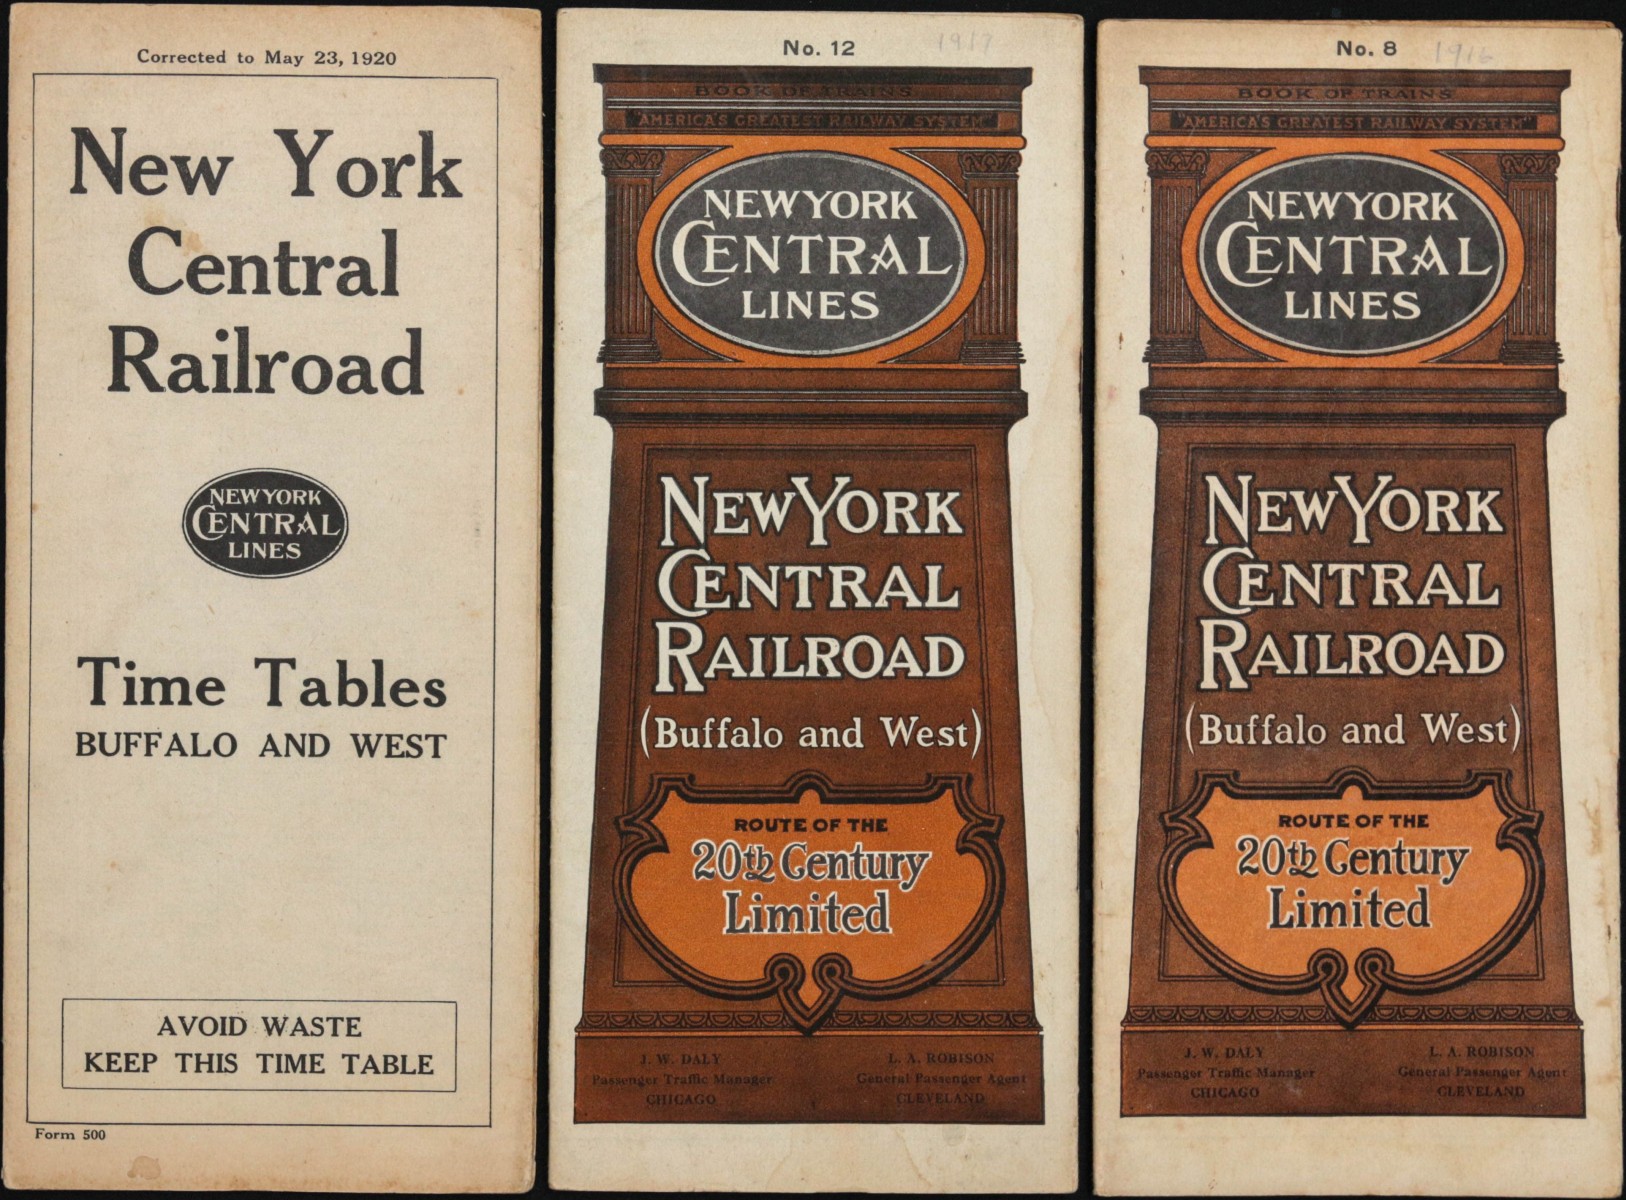 A COLLECTION OF NEW YORK CENTRAL LINES PAPER EPHEMERA